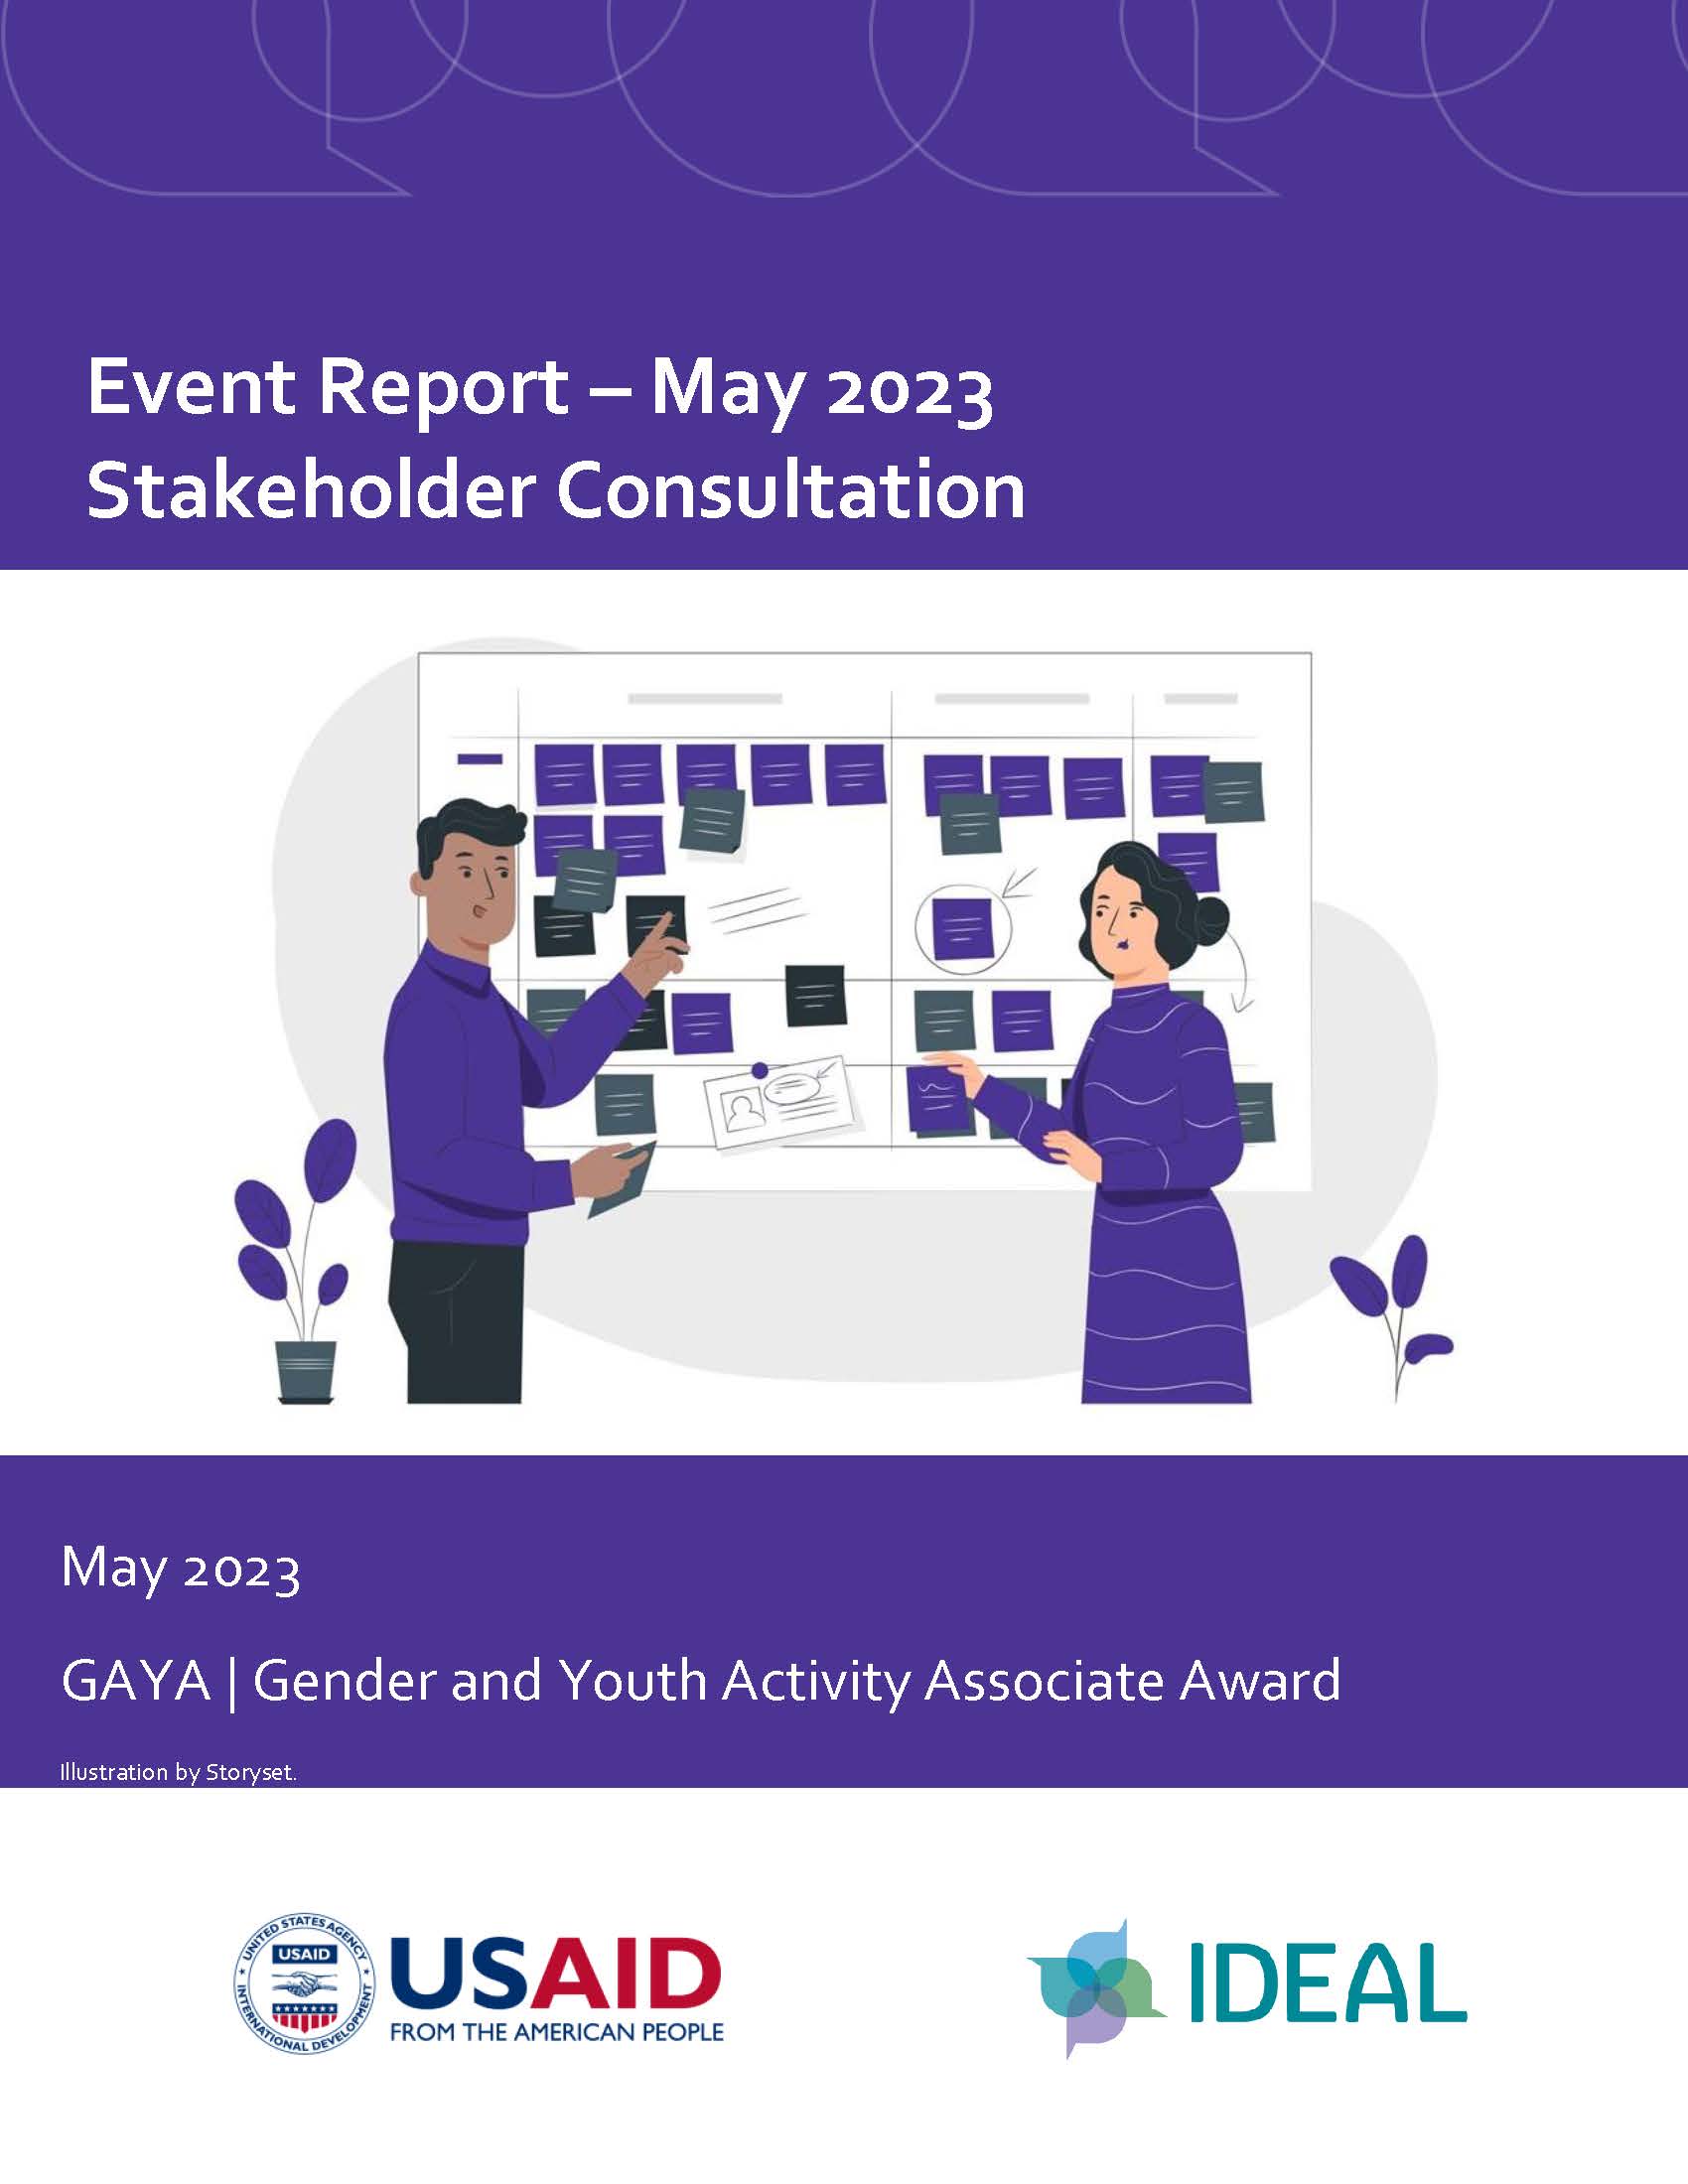 Event report cover page, reading "Event Report - May 2023 Stakeholder Consultation" with a graphic of two people discussing in front of a board full of sticky notes. 